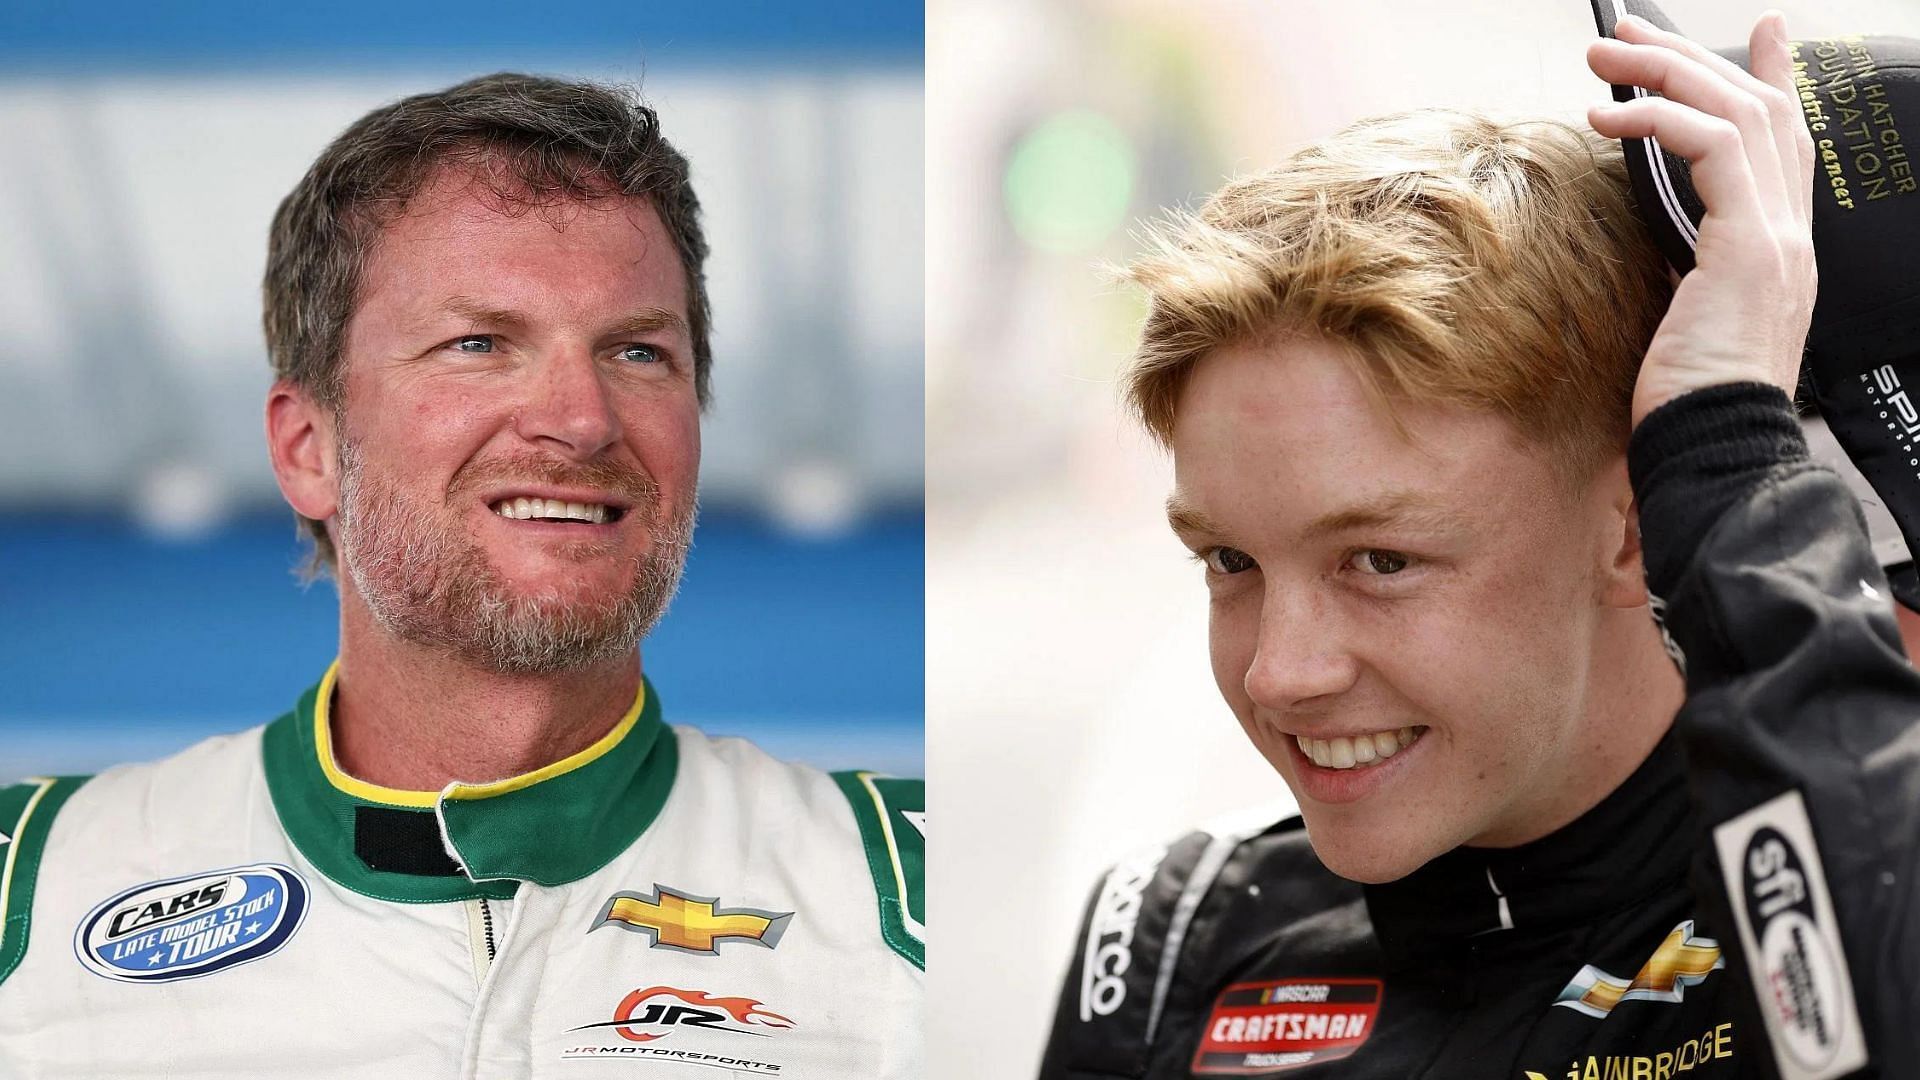 Dale Earnhardt Jr. (L) is reportedly considering signing Connor Zilisch (R) as a full-time Xfinity driver for JRM (Image Sources: All images from Getty)